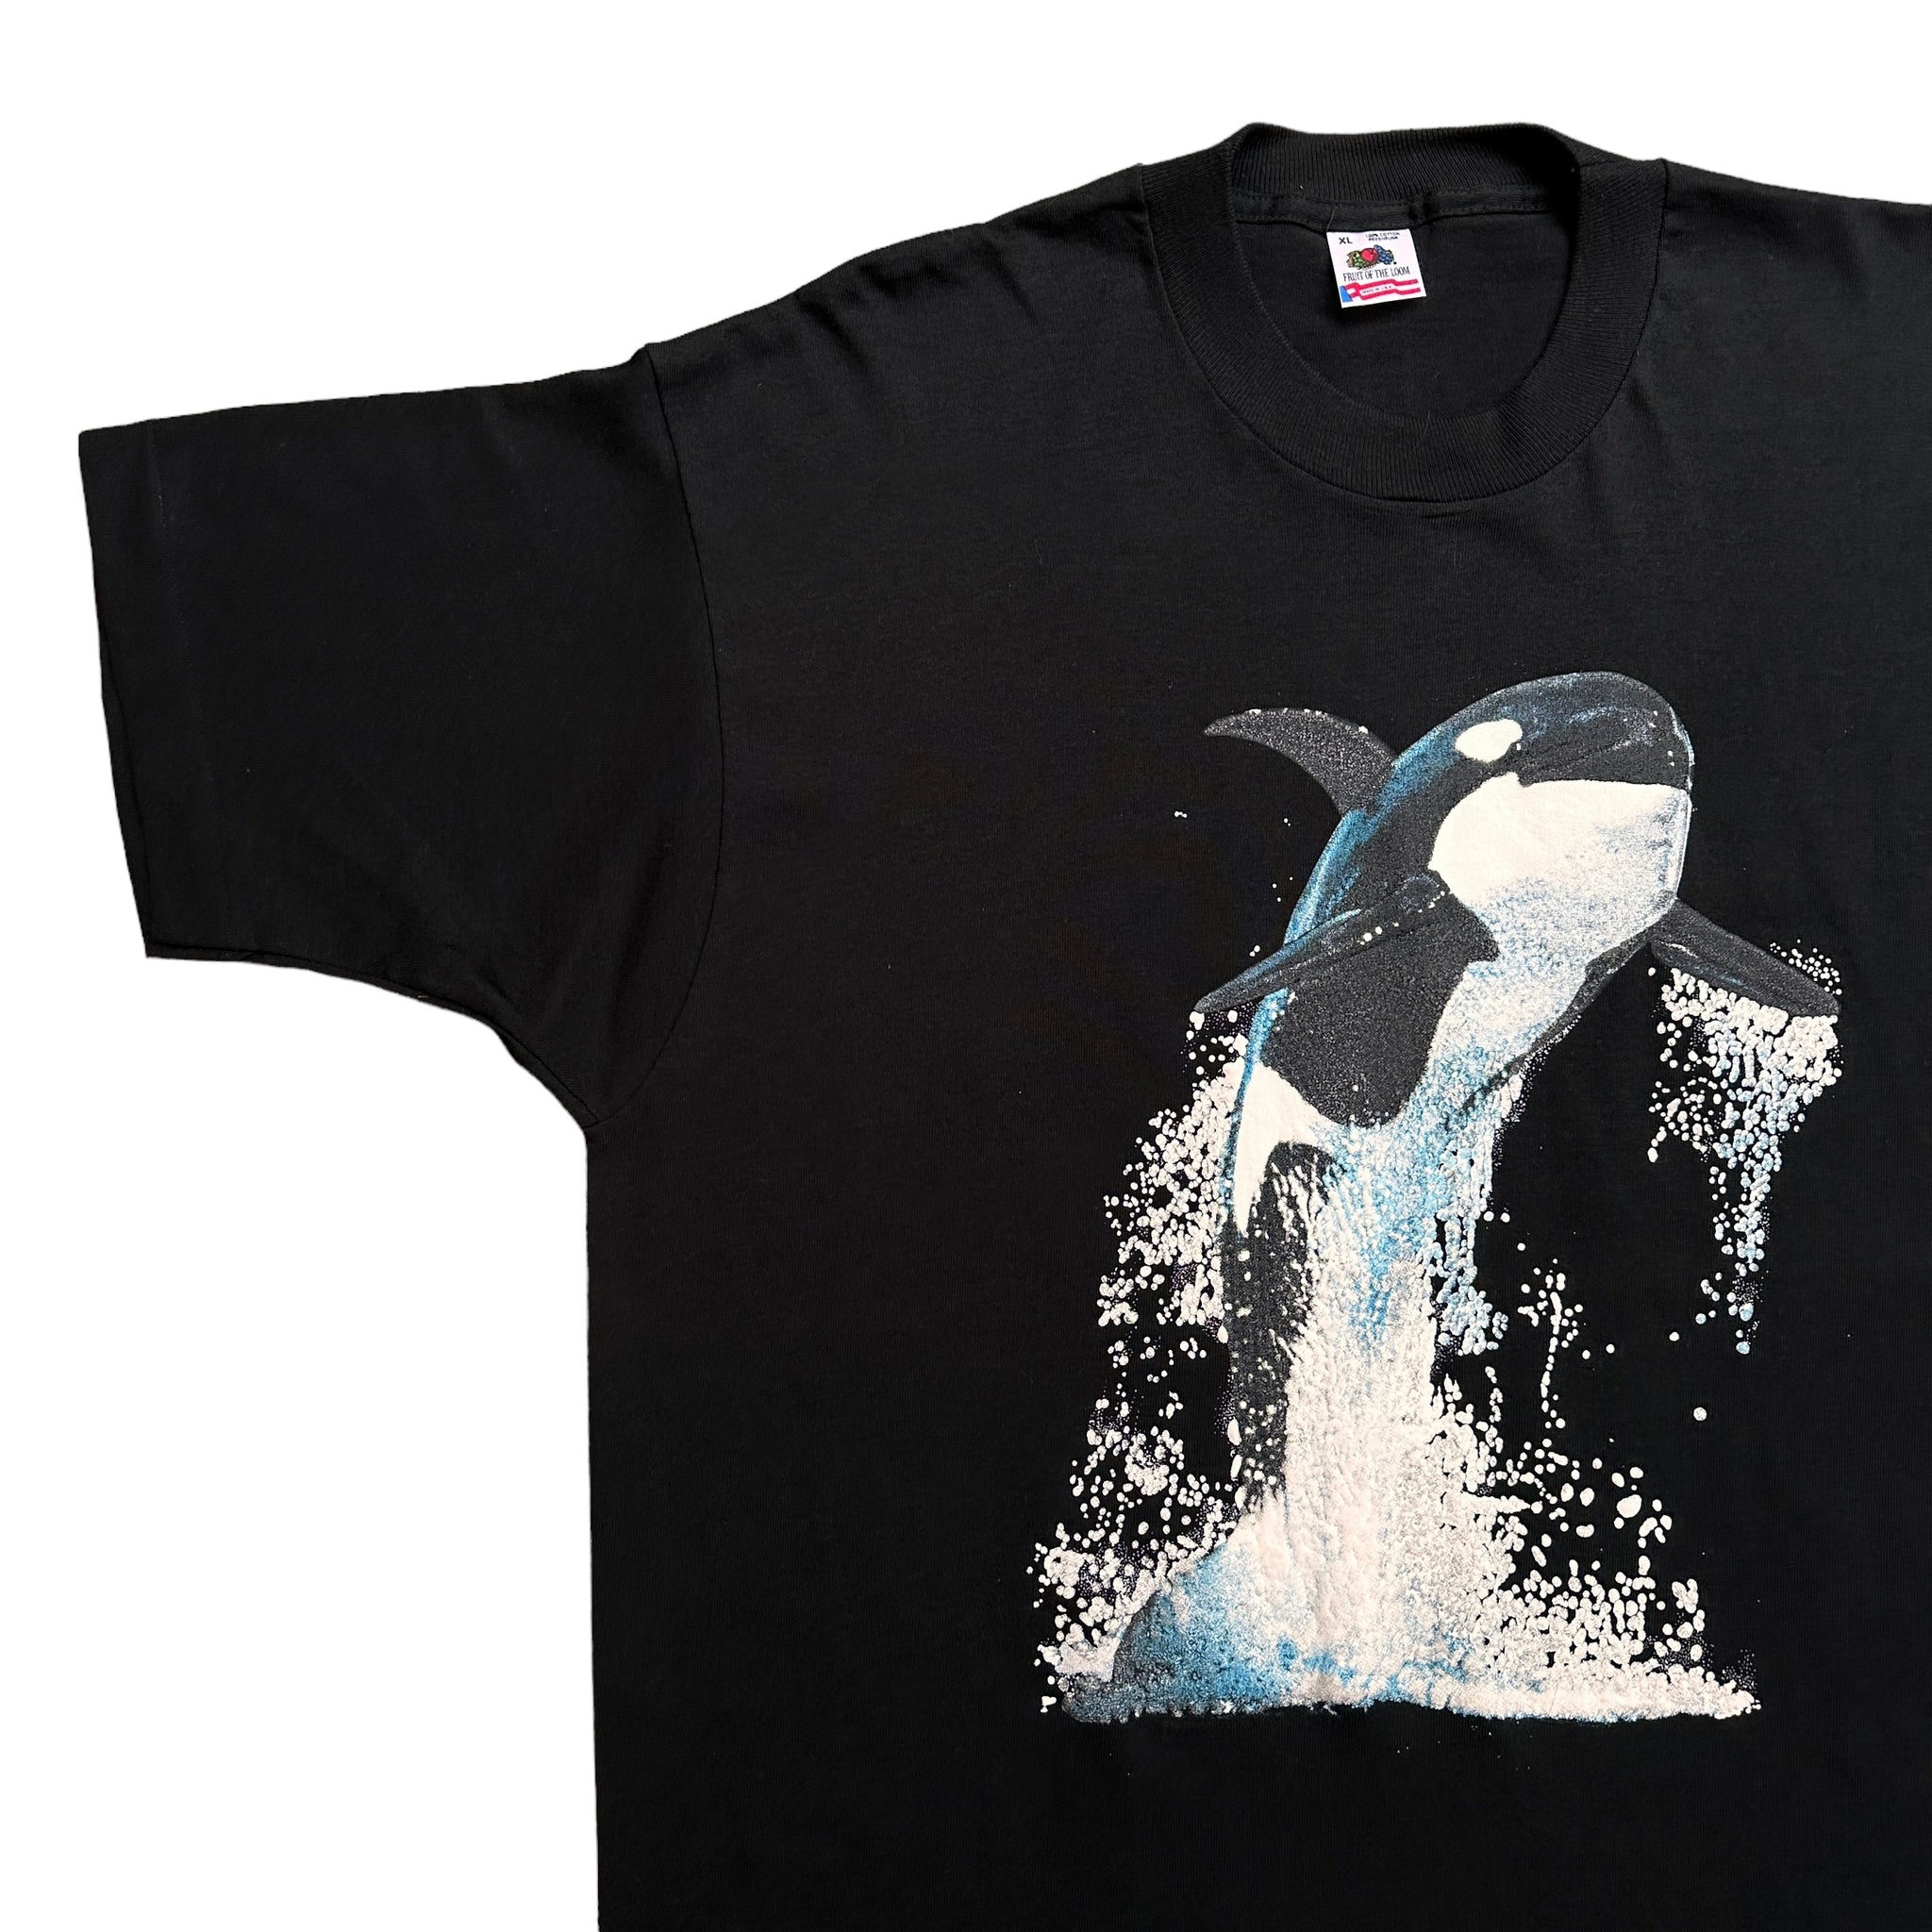 Free willy orca tee XL